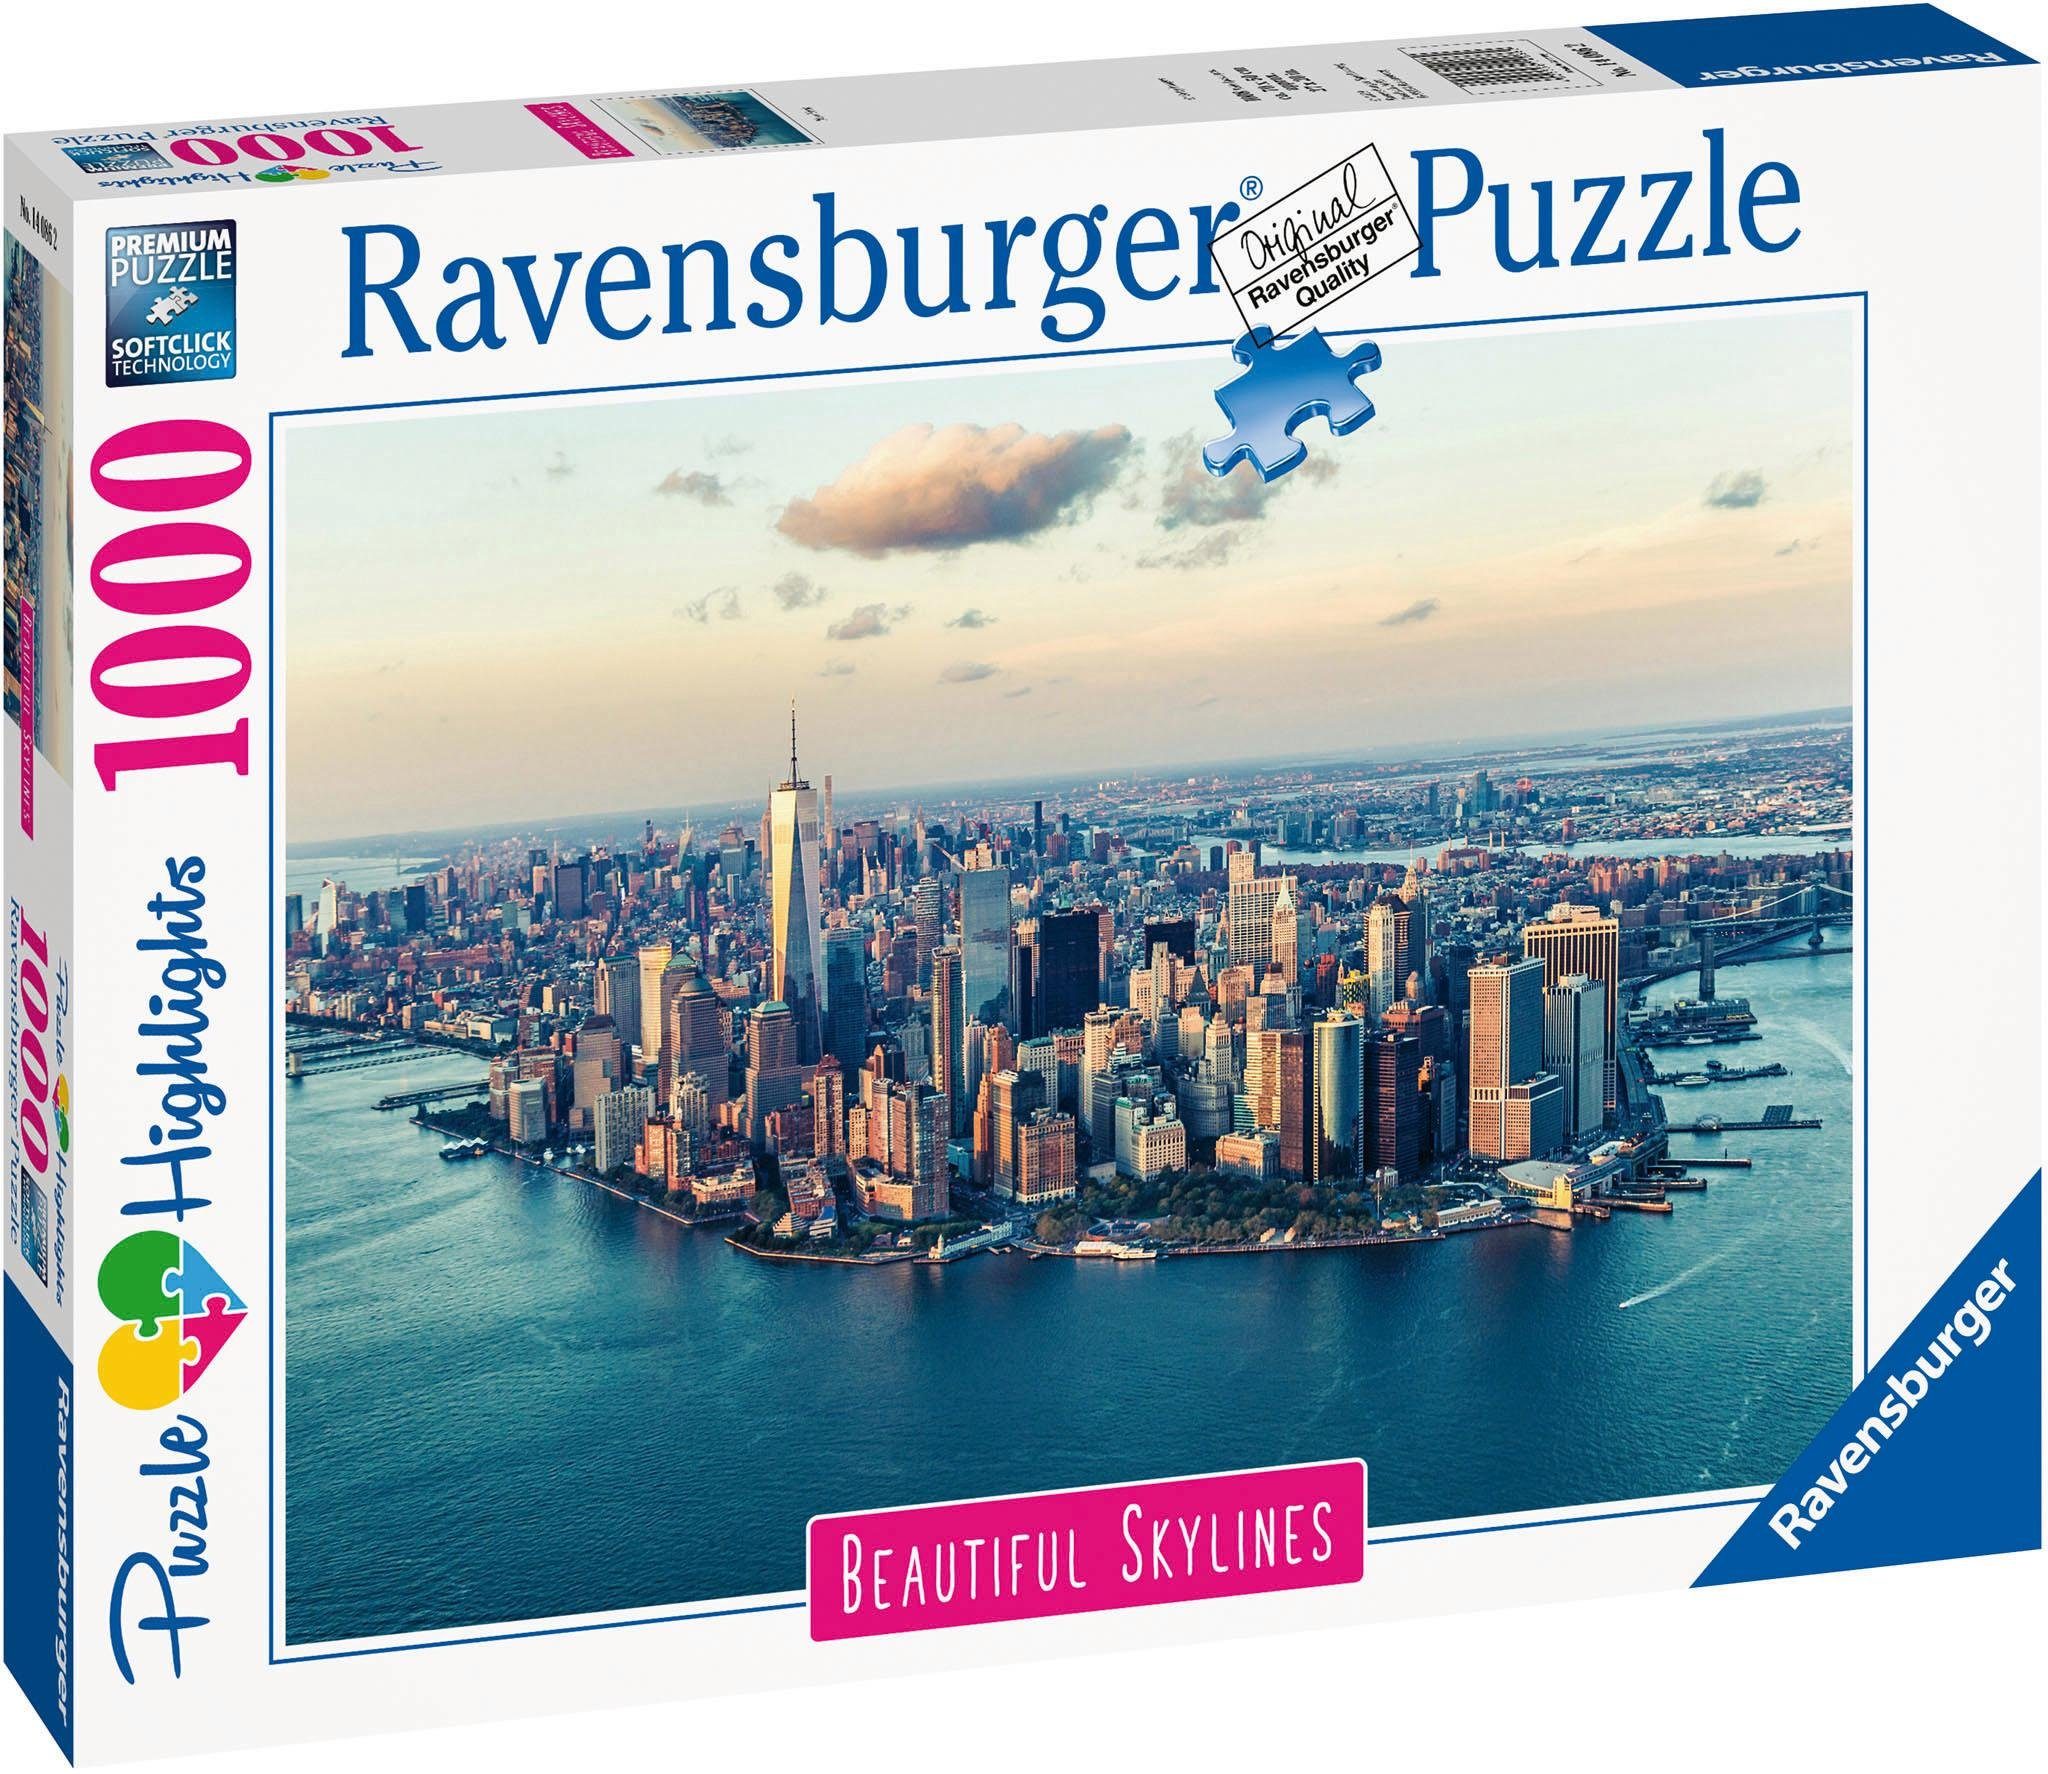 - Highlights Skylines Ravensburger New Puzzle - Made in schützt - Puzzle Germany, Beautiful Wald York, Puzzleteile, FSC® 1000 weltweit